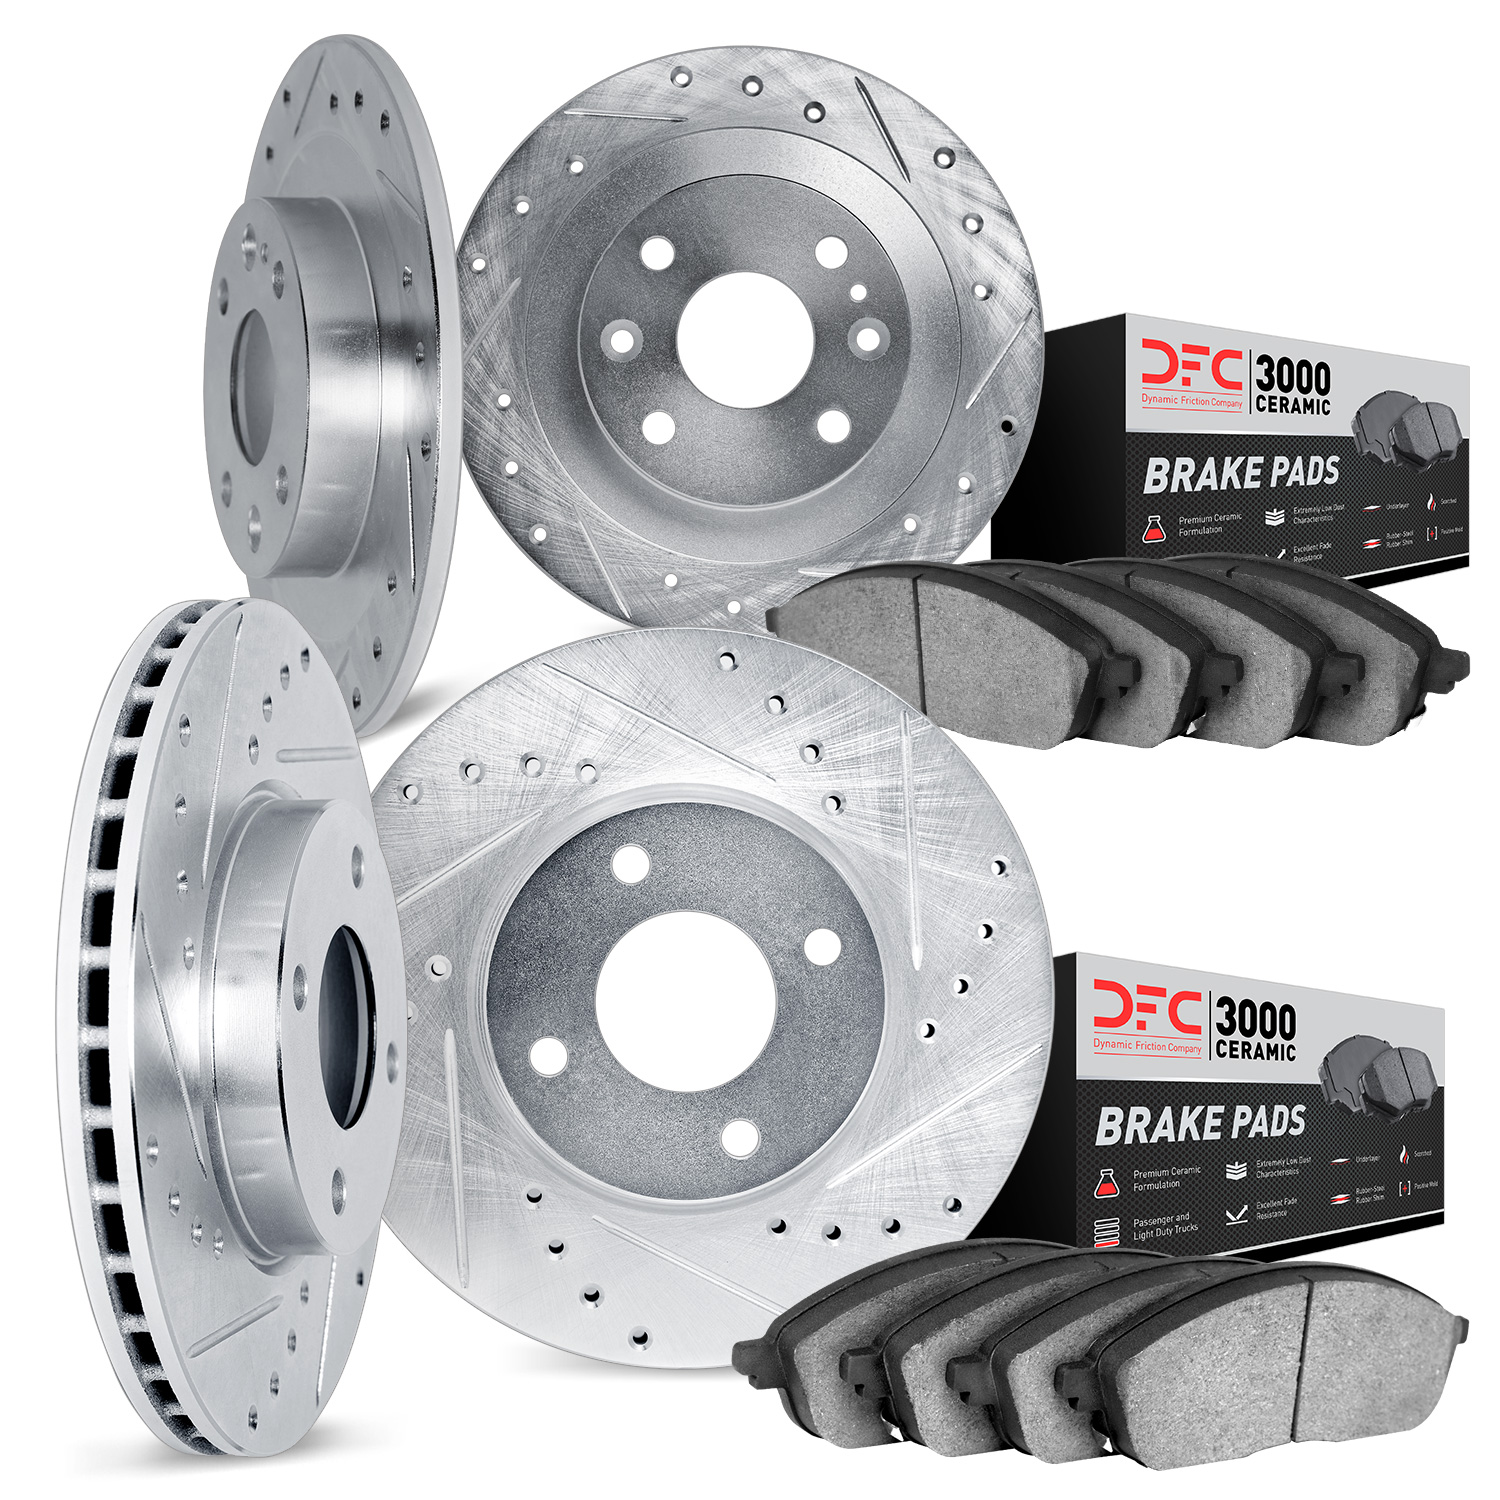 7304-80045 Drilled/Slotted Brake Rotor with 3000-Series Ceramic Brake Pads Kit [Silver], Fits Select Multiple Makes/Models, Posi